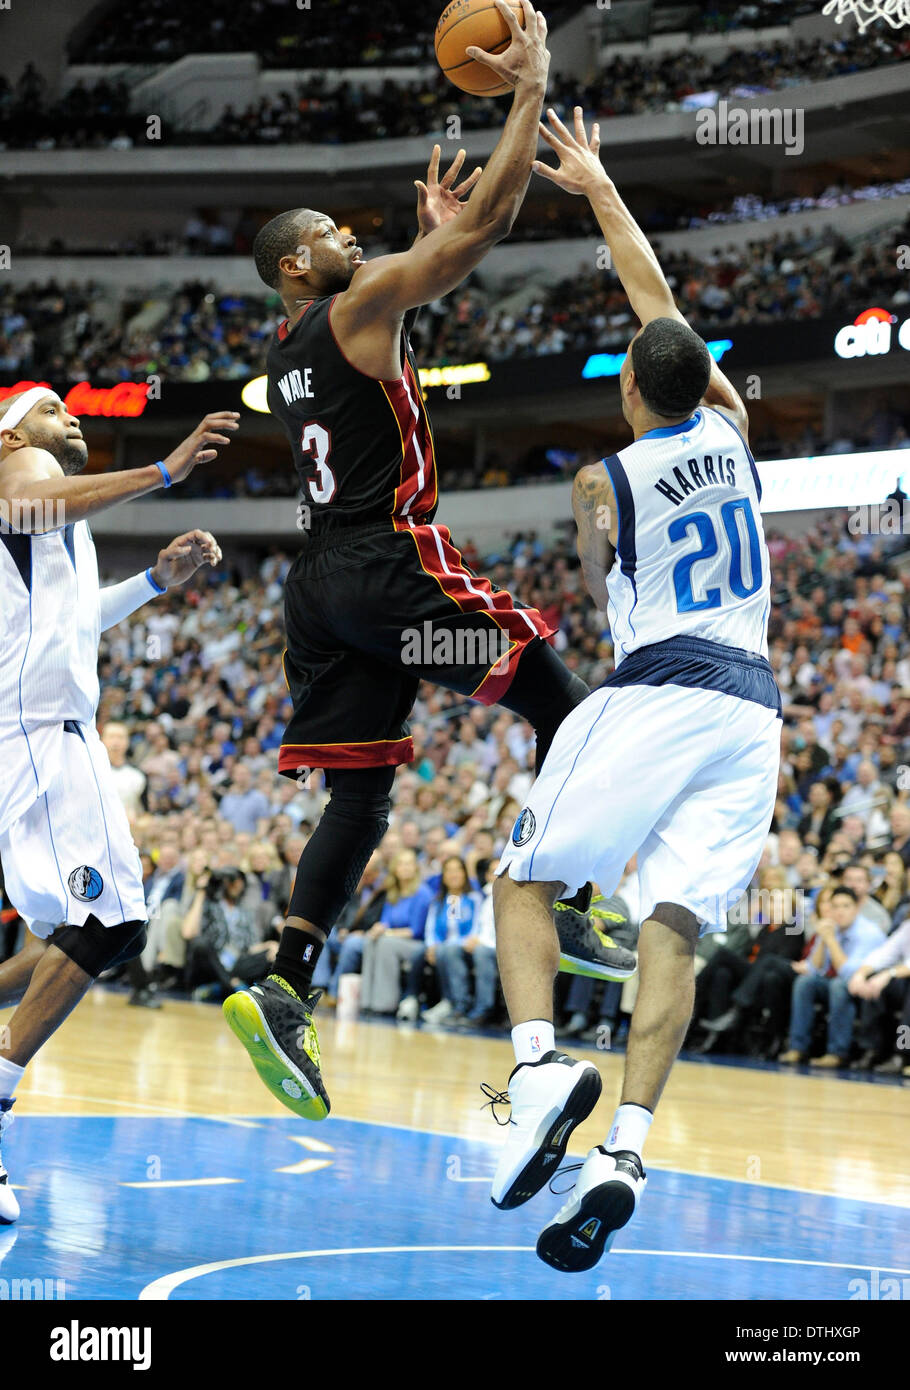 Dallas, TX, USA . 18th Feb, 2014. Miami Heat shooting guard Dwyane Wade #3 during an NBA game between the Miami Heat and the Dallas Mavericks at the American Airlines Center in Dallas, TX Miami defeated Dallas 117-106 Credit:  Cal Sport Media/Alamy Live News Stock Photo